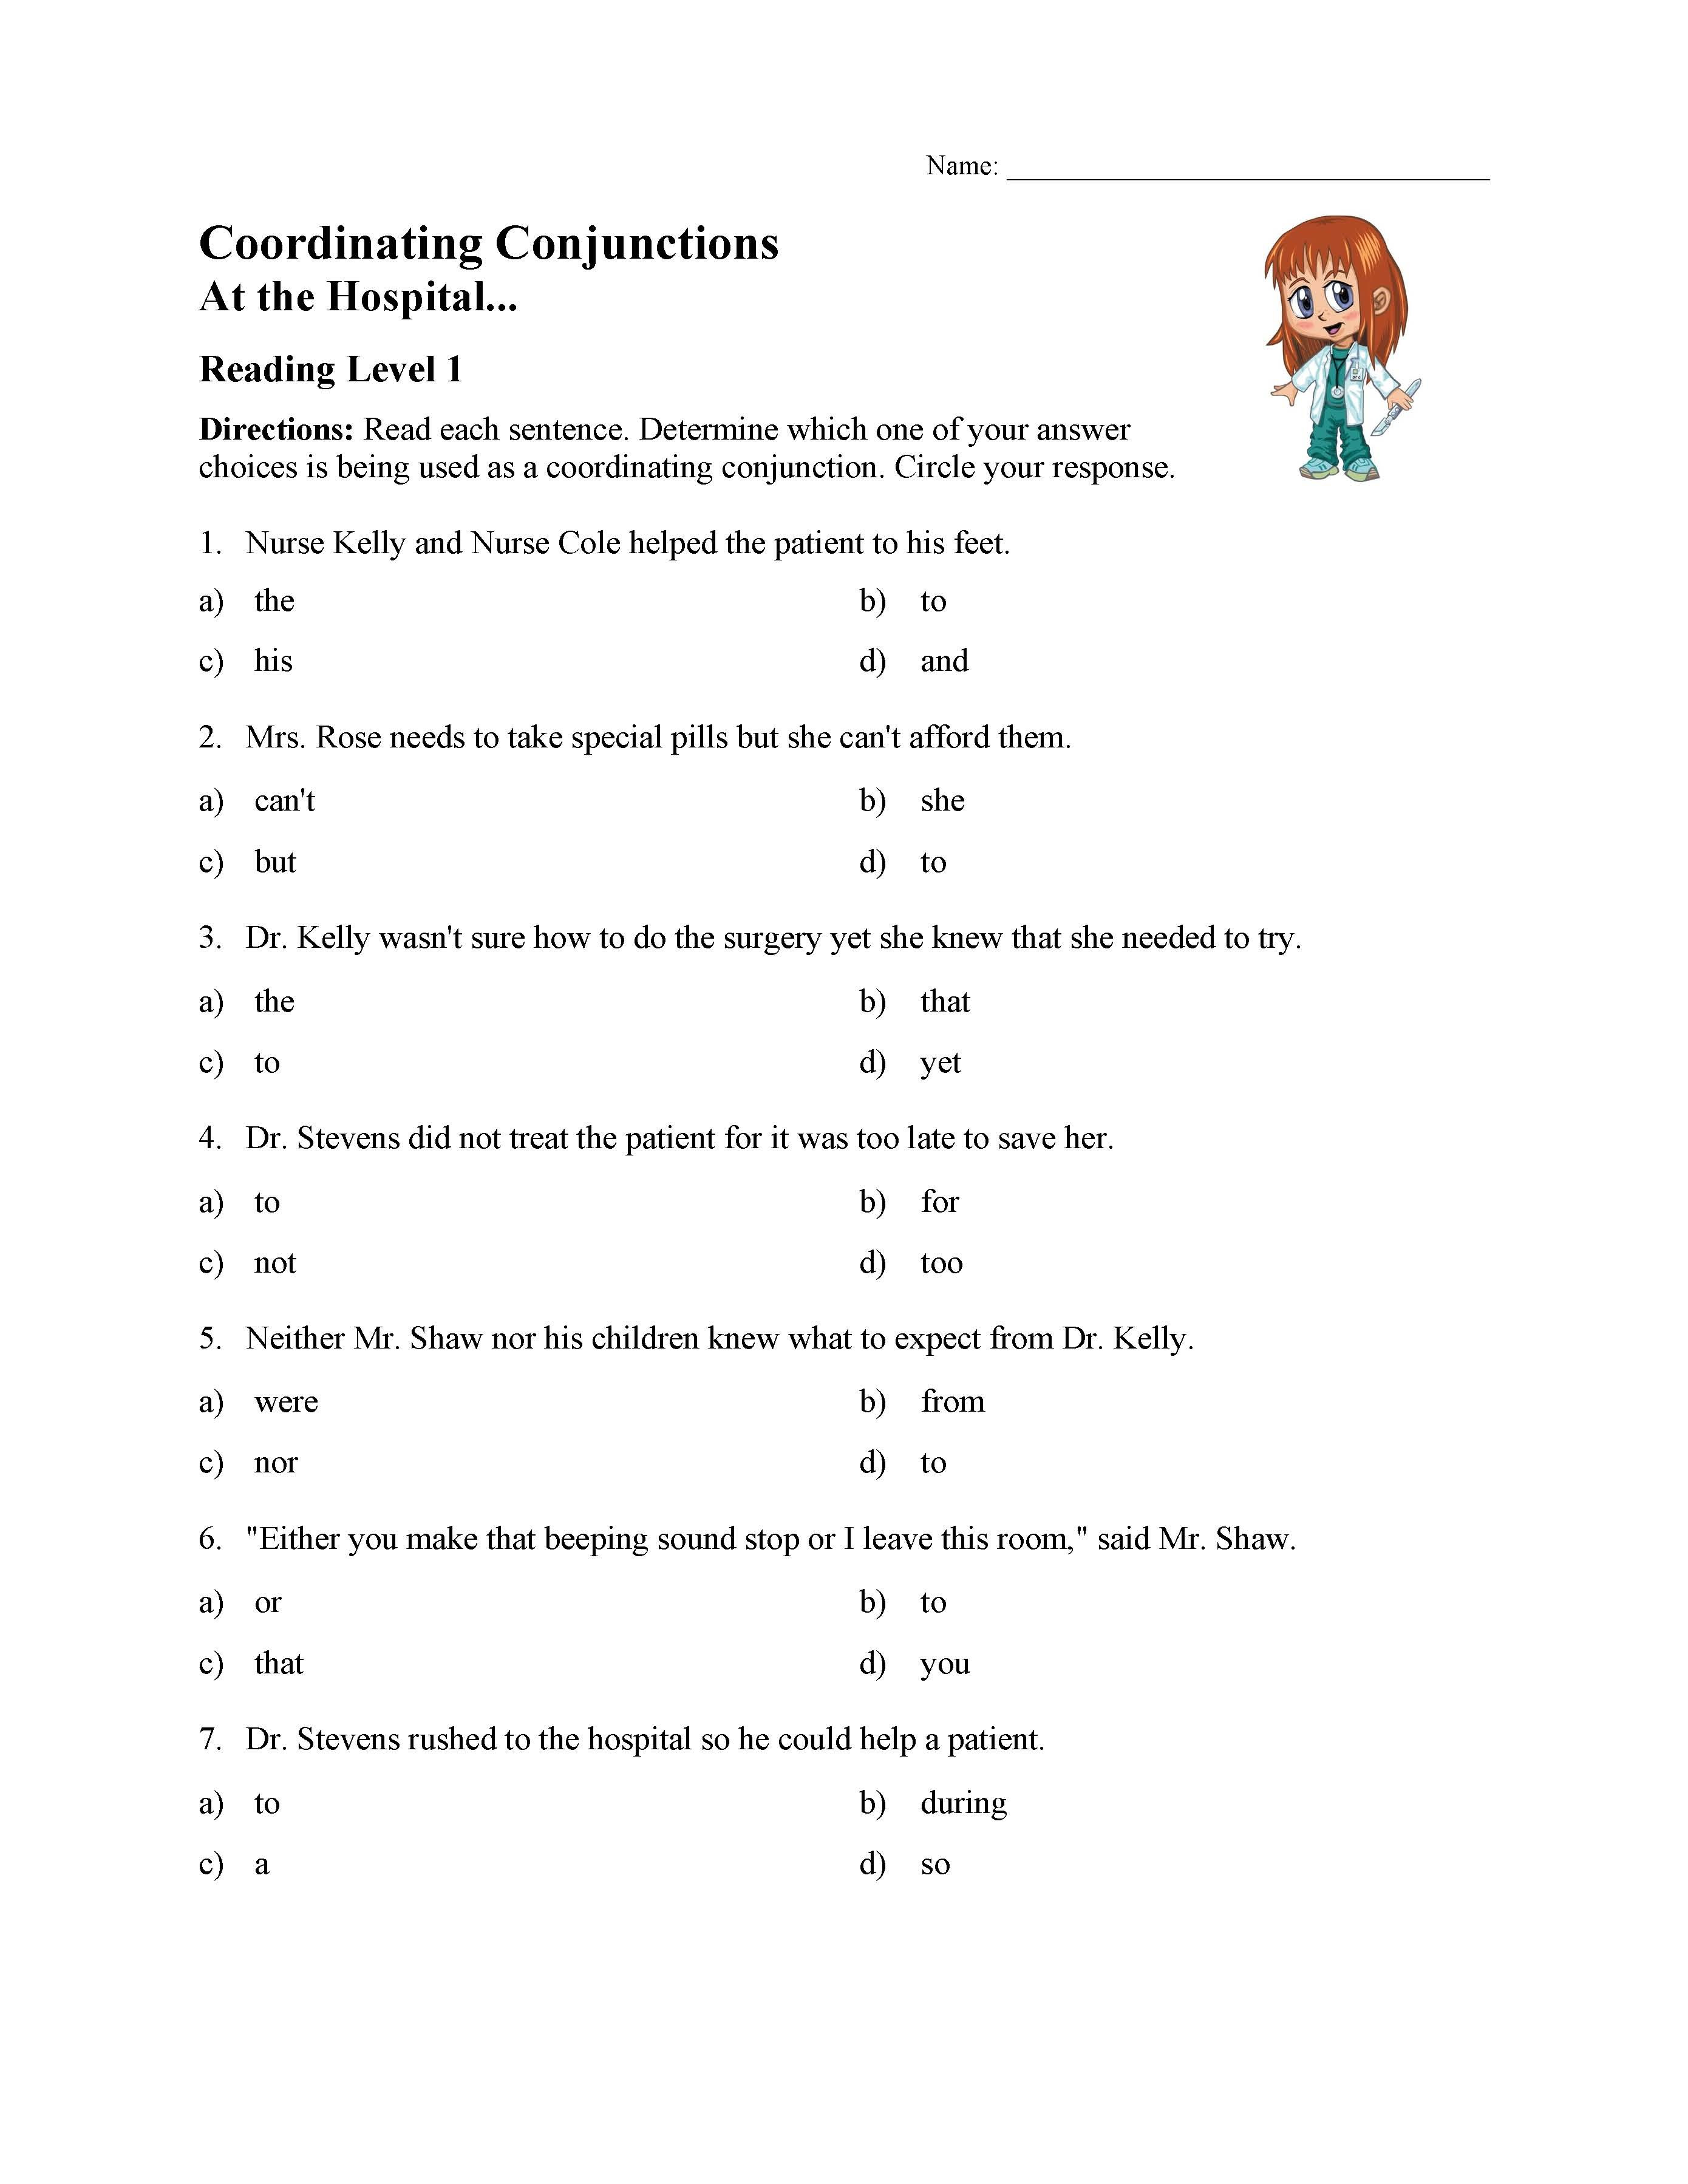 Conjunctions Worksheets 5th Grade Coordinating Conjunctions Worksheet Reading Level 1